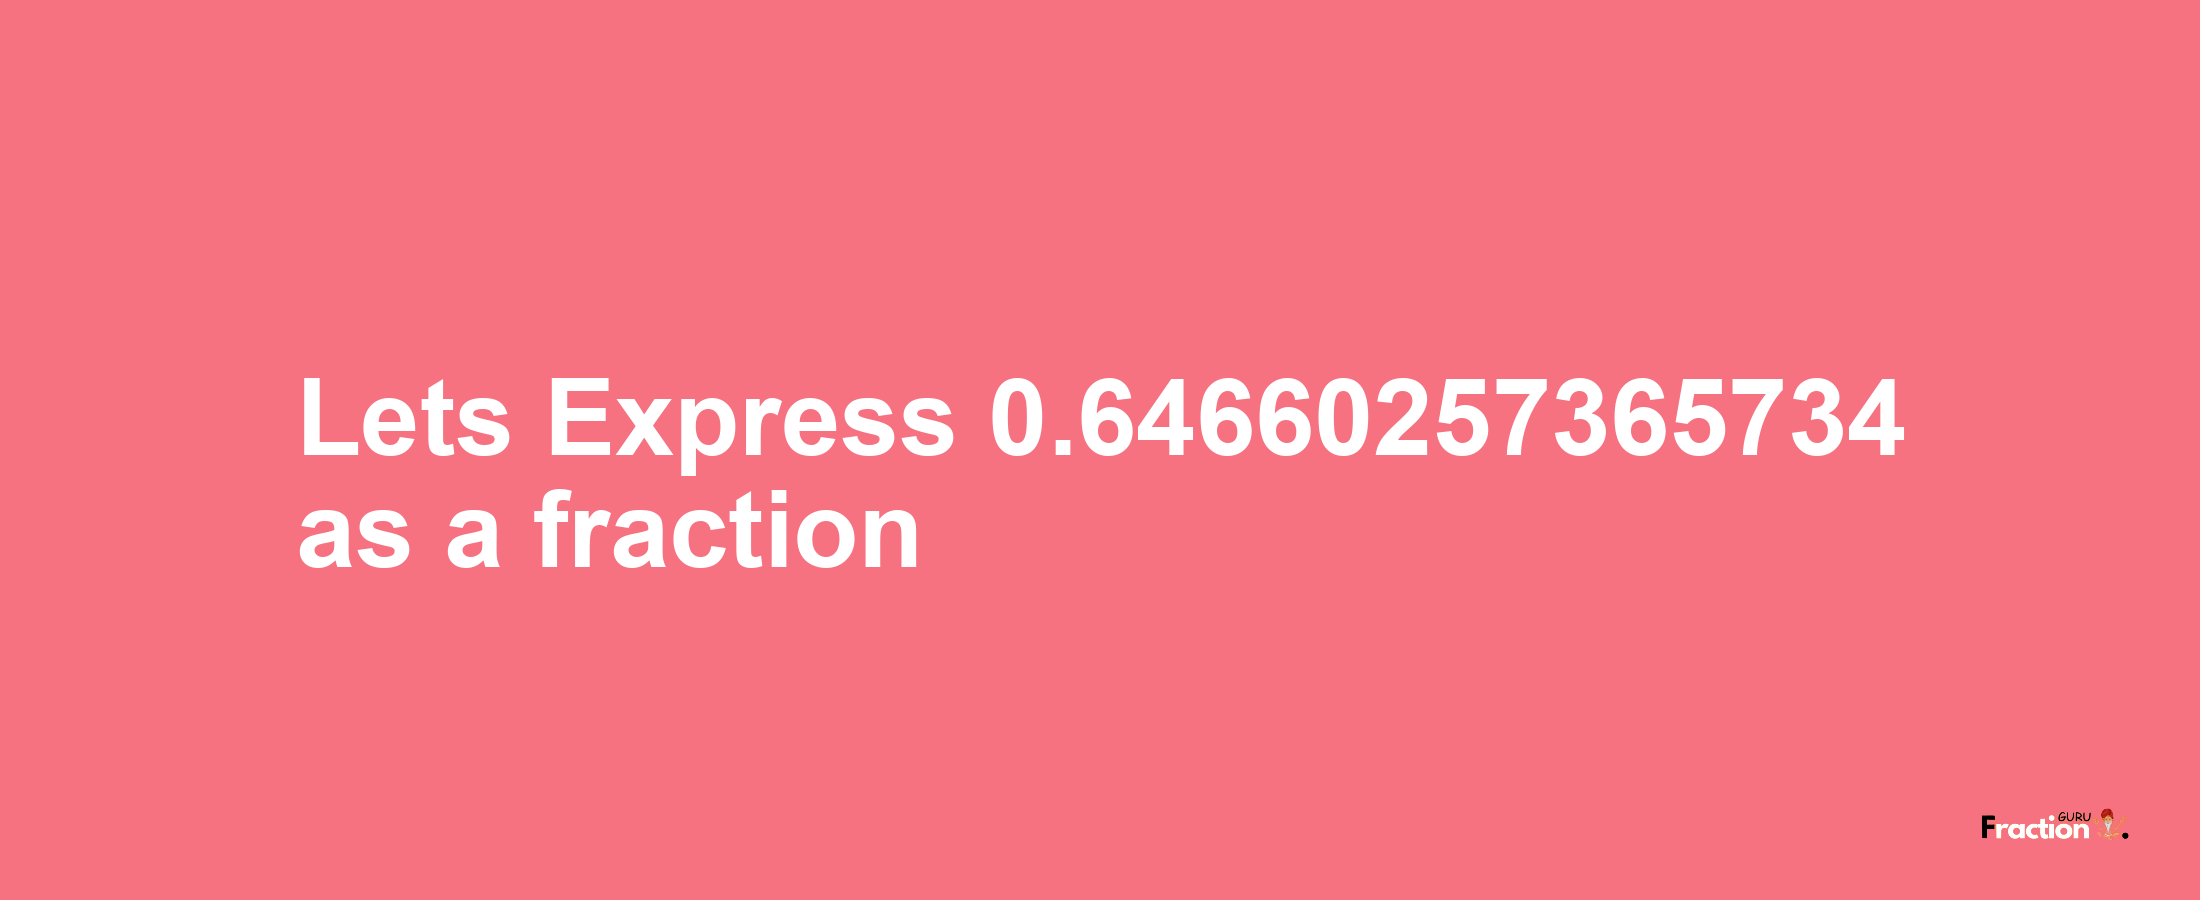 Lets Express 0.64660257365734 as afraction